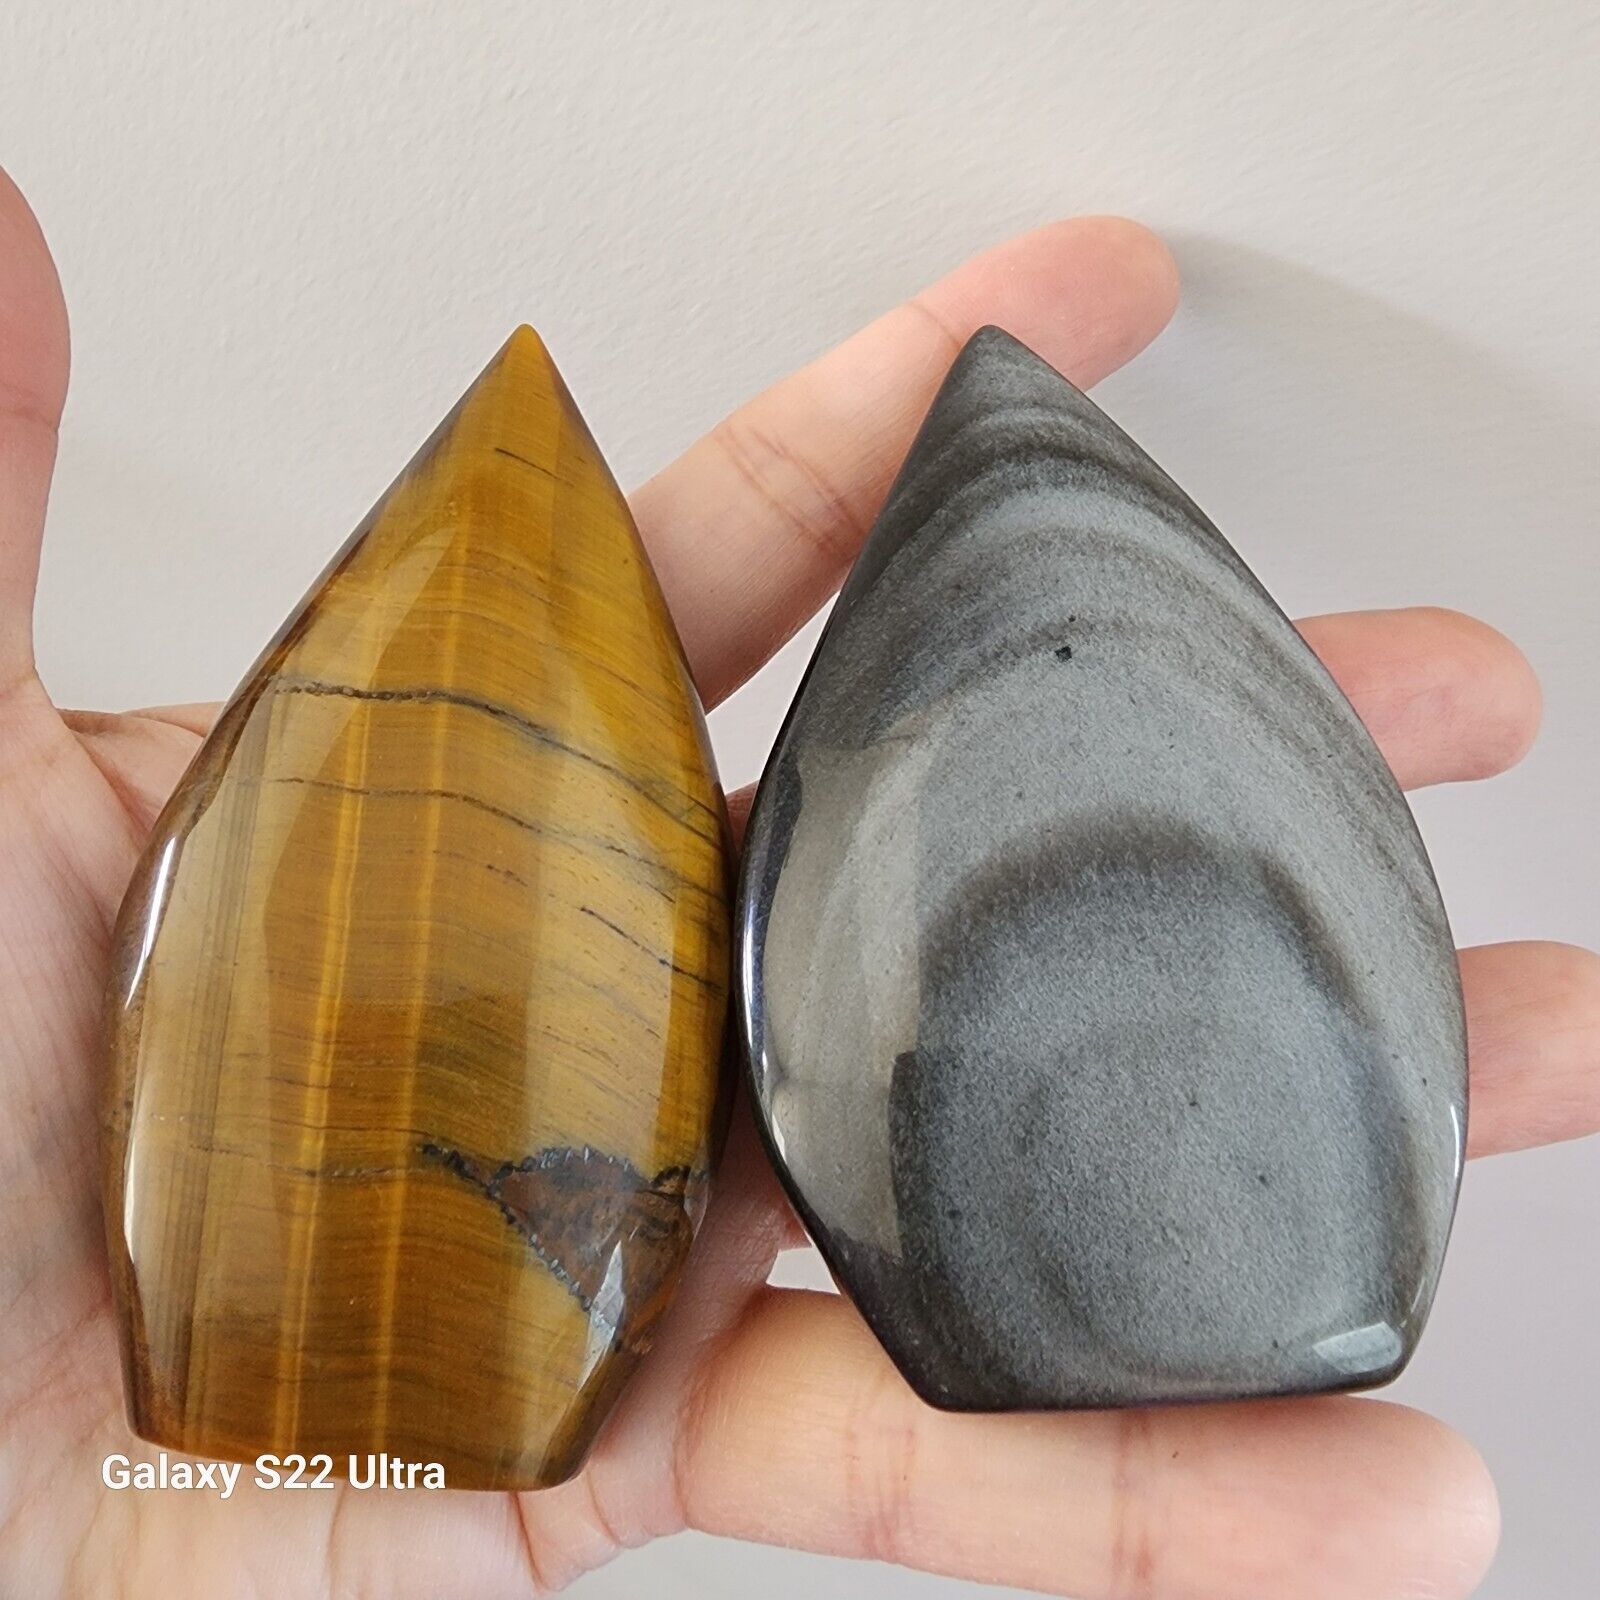 Lot of 2 Polished Crystal Tiger Eye And Silver Sheen Obsidian Stone Flames